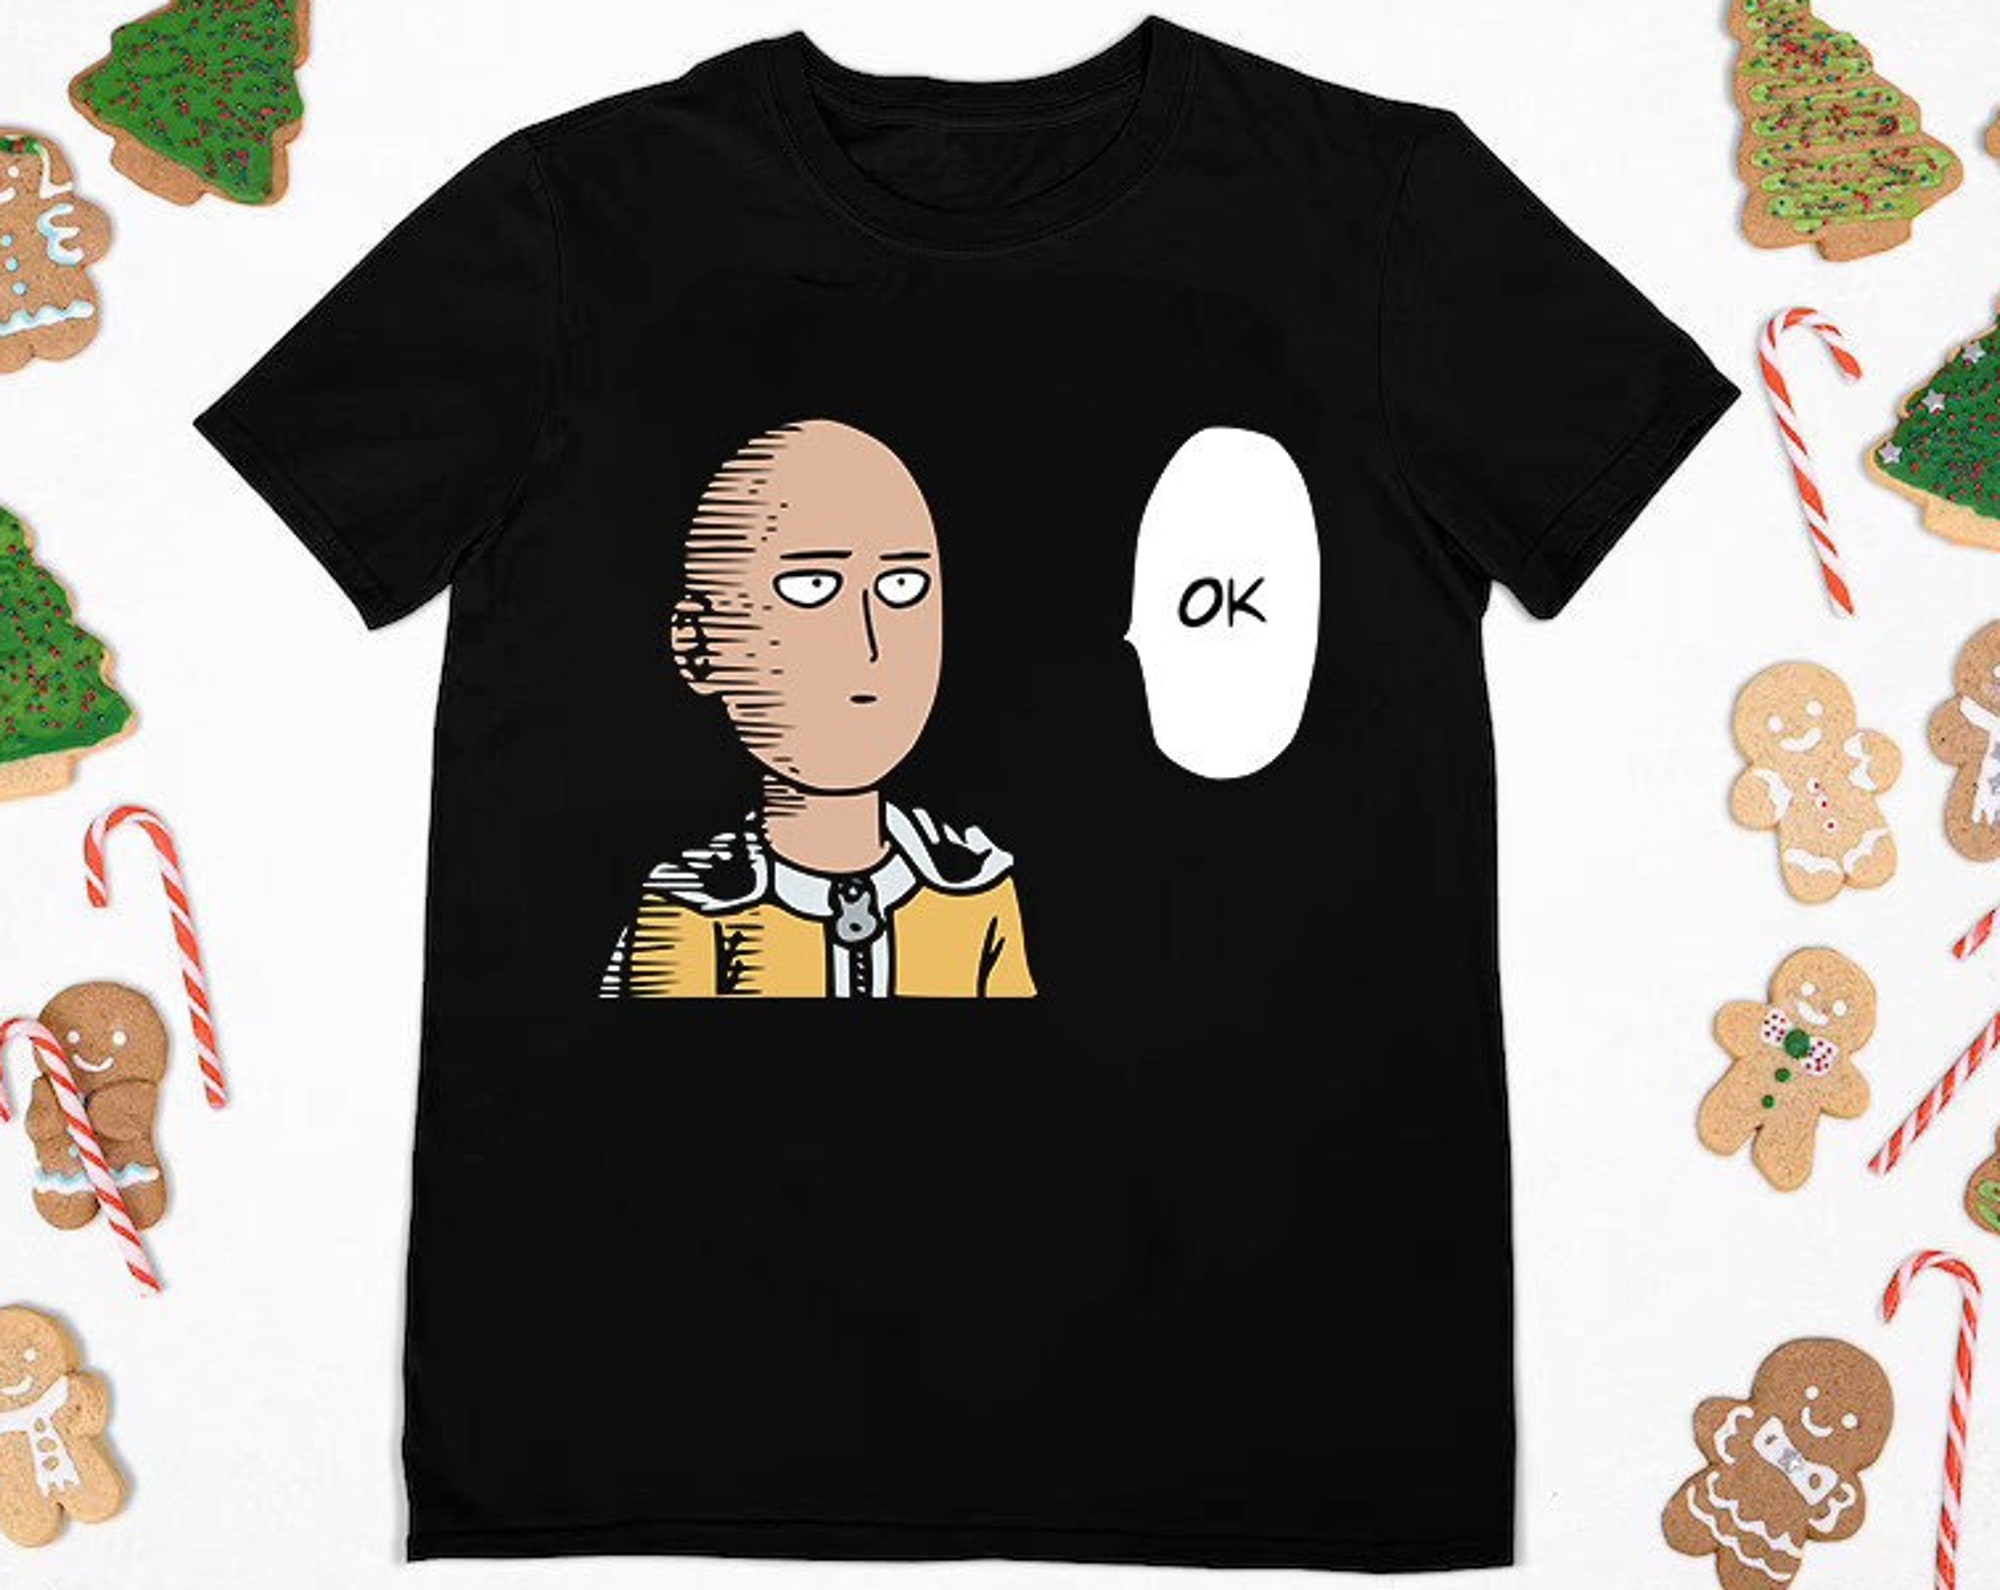 Discover Maglietta T-Shirt One-Punch-Man Uomo Donna Bambini - Anime Giapponese Legendary OK